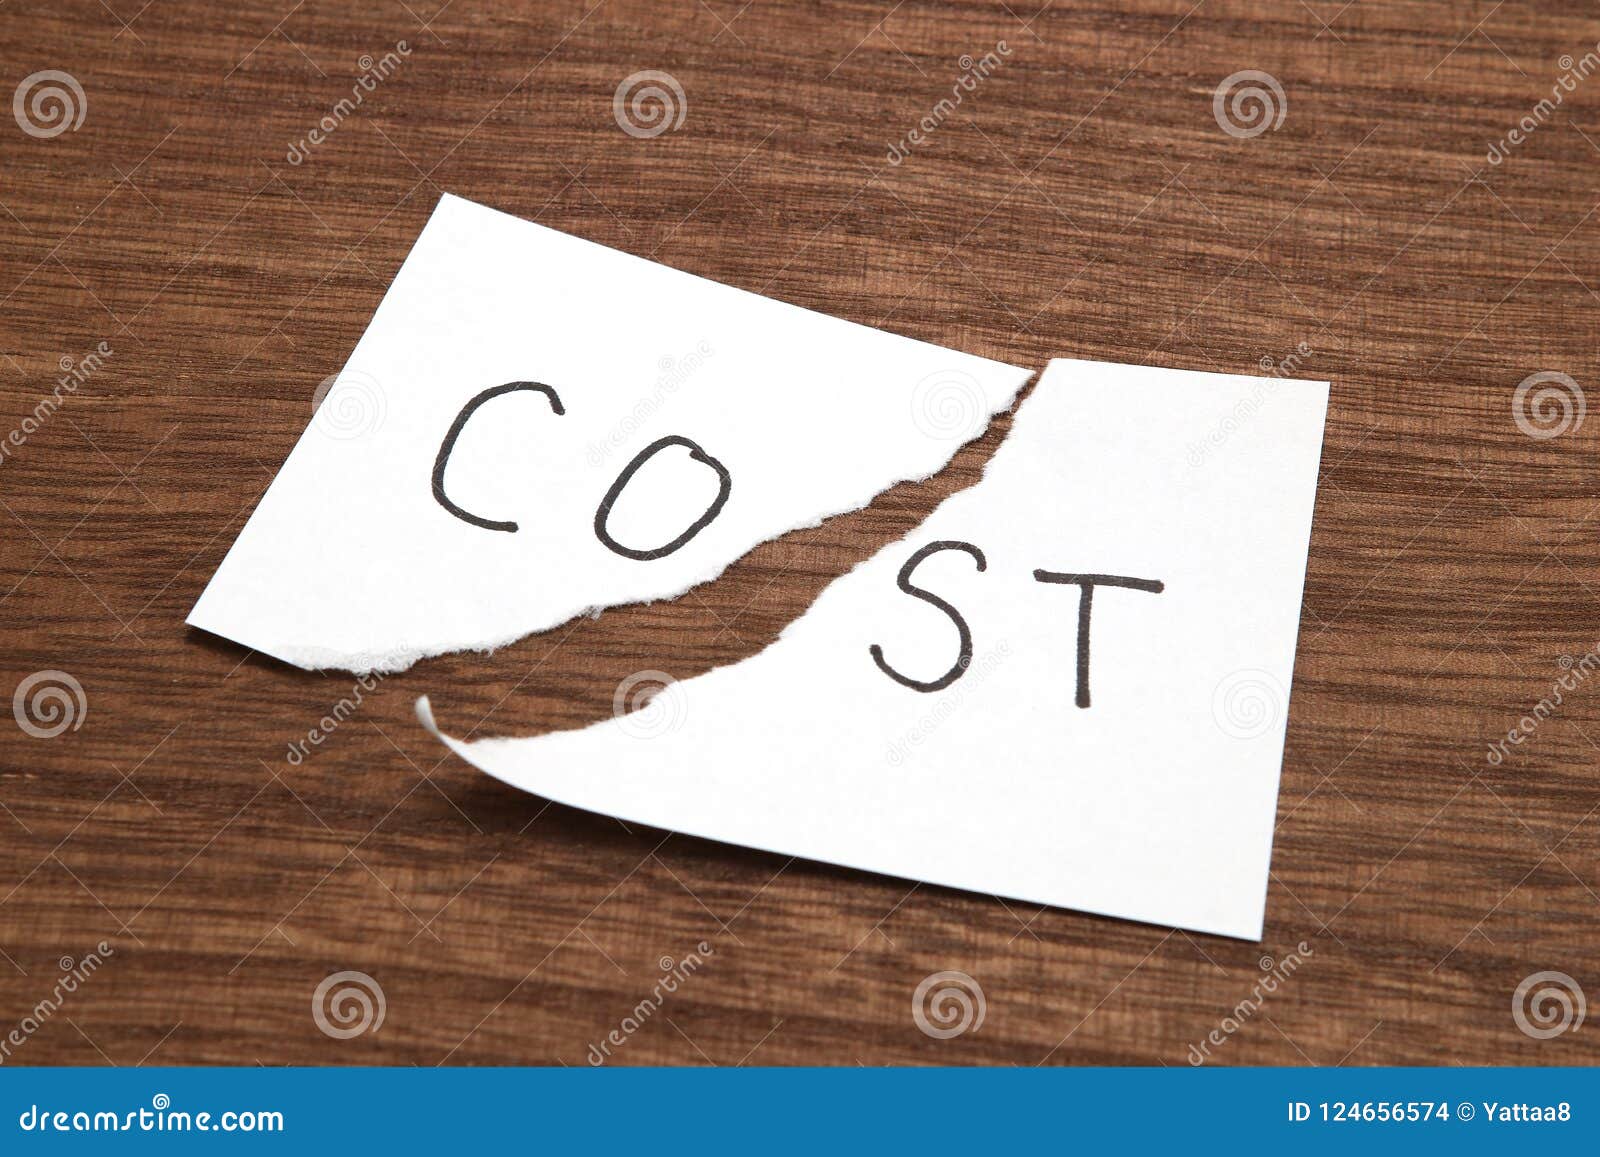 how much does word cost